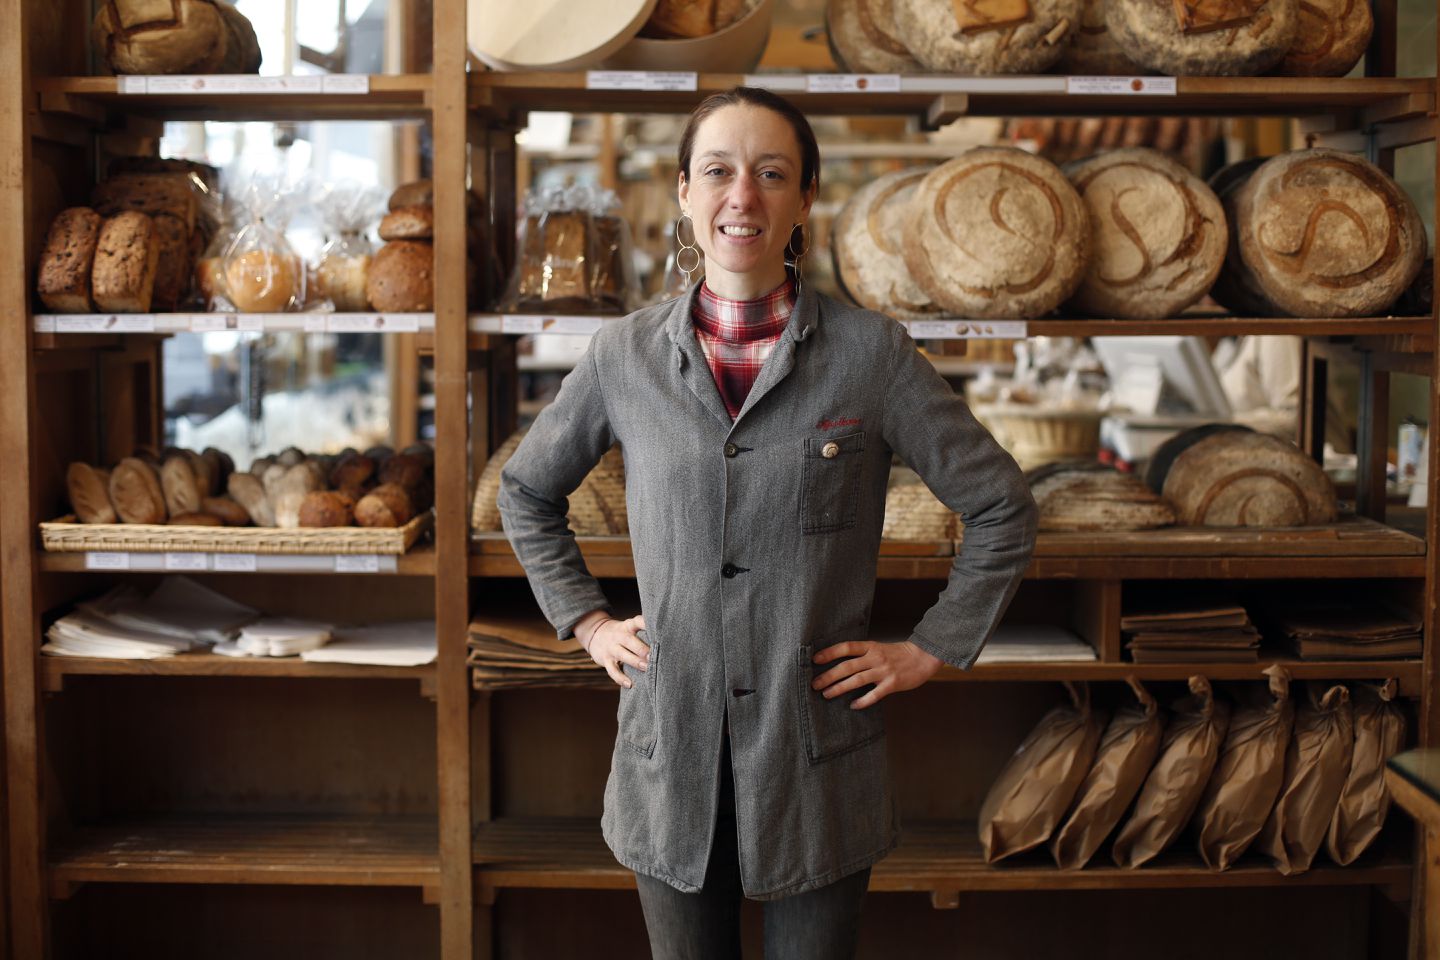 Chef’s Table with Apollonia Poilâne, Paris’s Most Famous Bakery